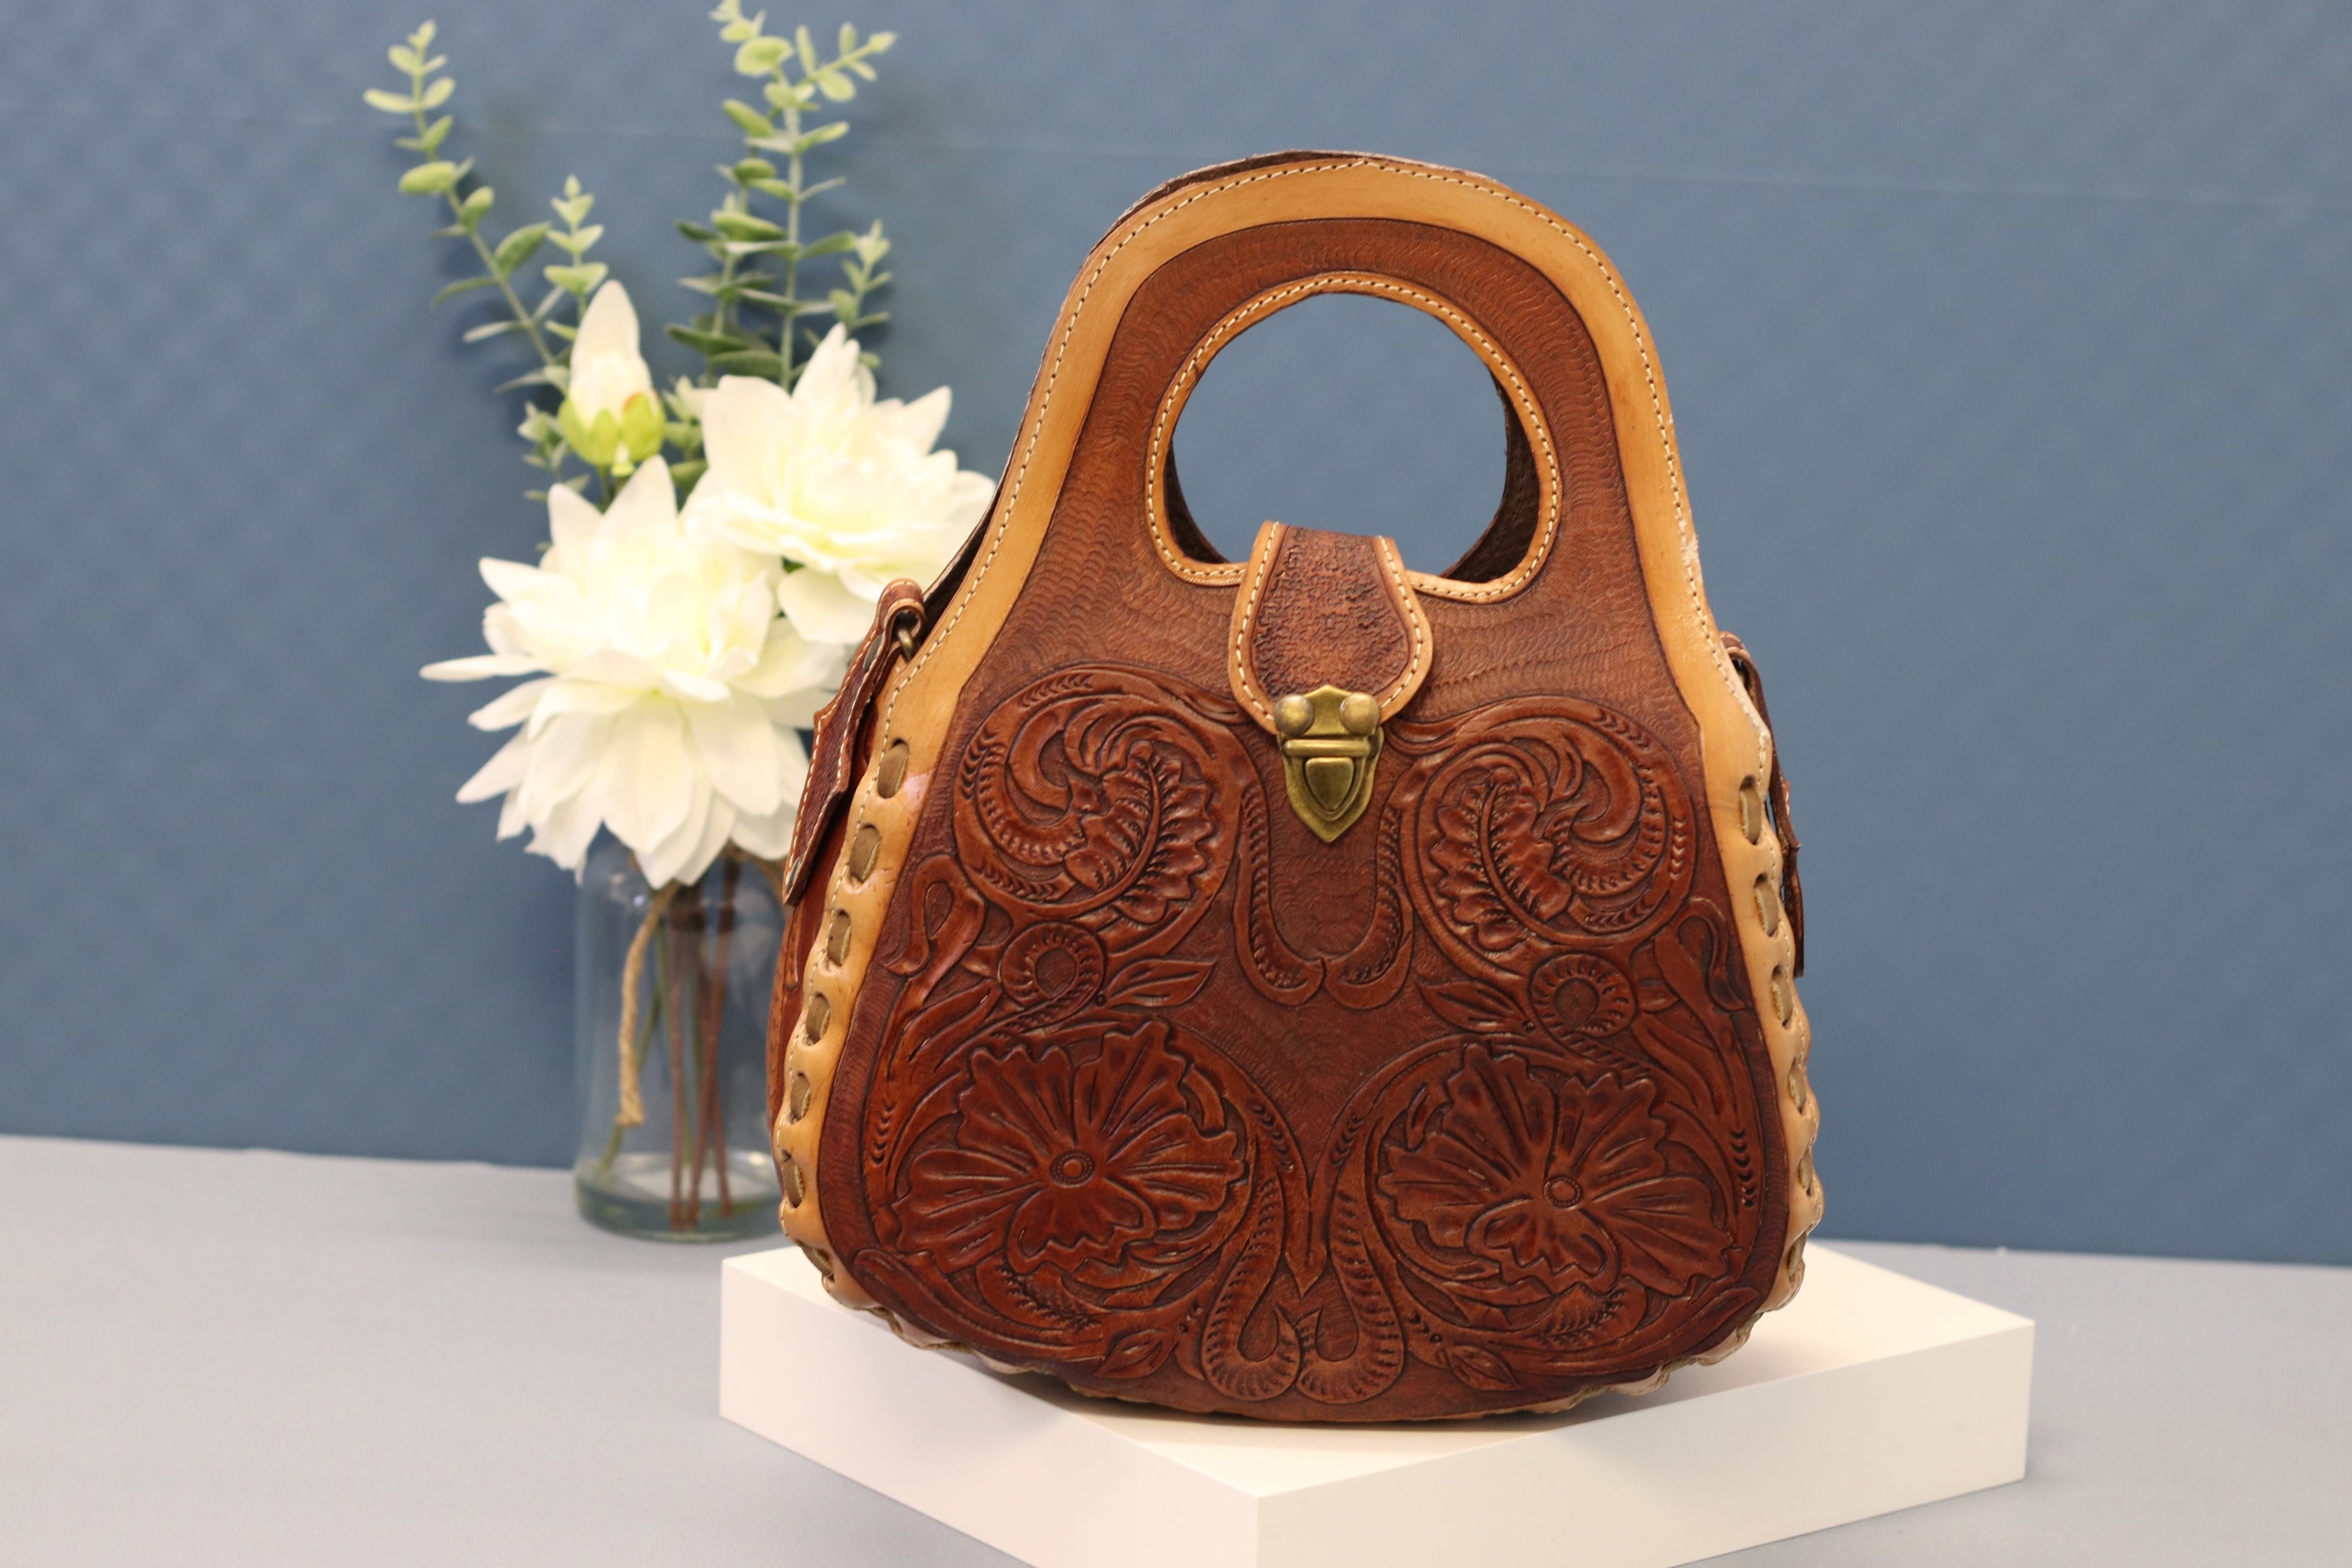 Brown Leather hand-tooled leather bag, purse, tote. Handbag top handled bag. Made by artisans in Central Mexico, shipping from the USA. A beautiful work of art. Buy Now at www.felipeandgrace.com